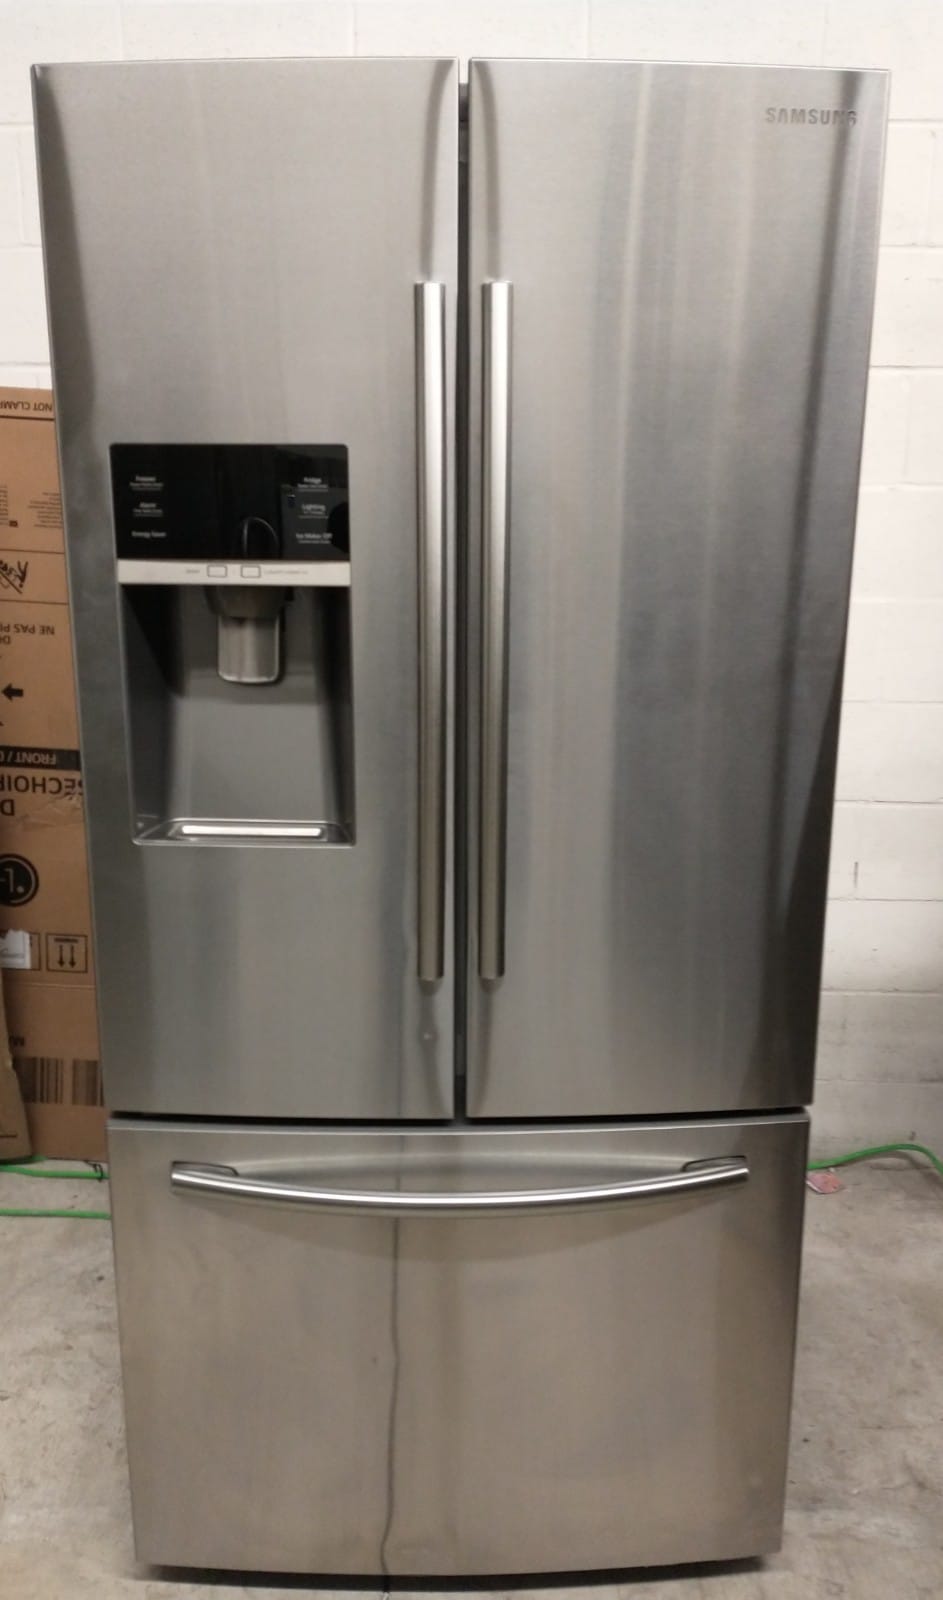 Order Your Used Refrigerator Samsung Rf26j7500sr/aa Today!